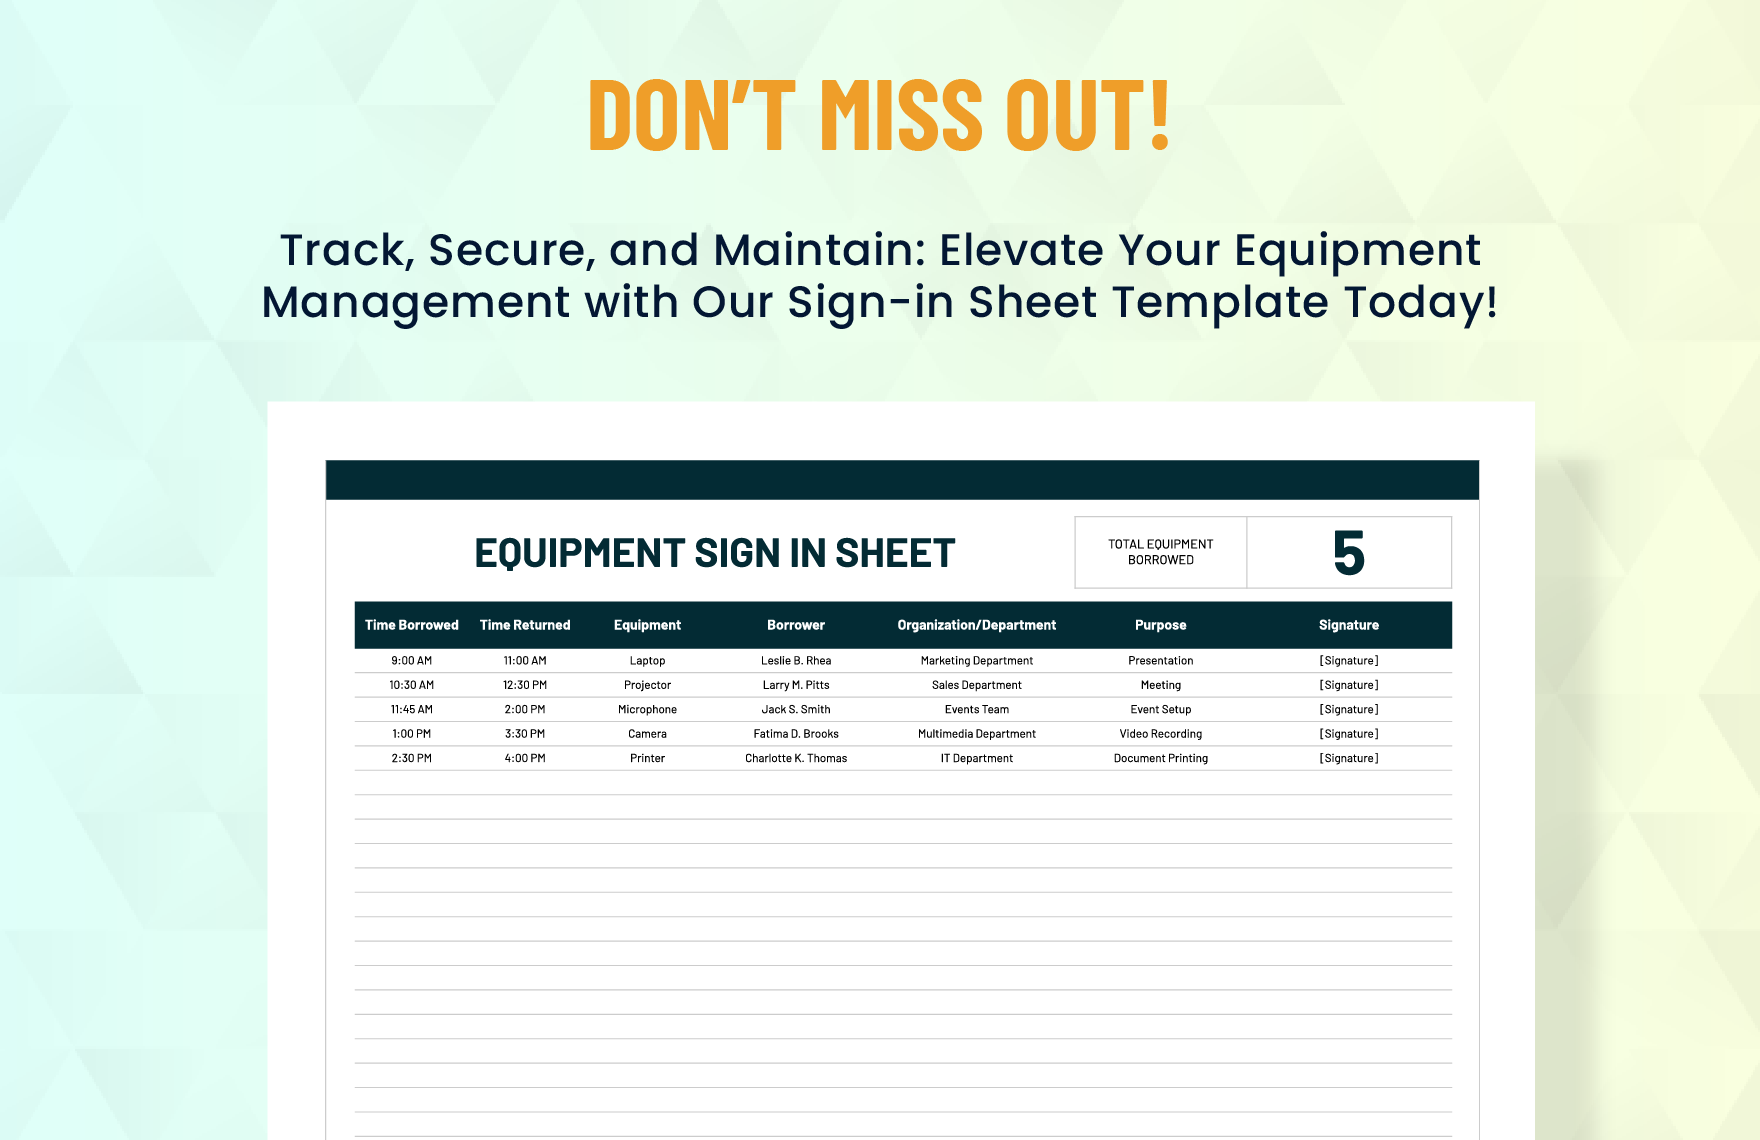 Equipment Sign in Sheet Template